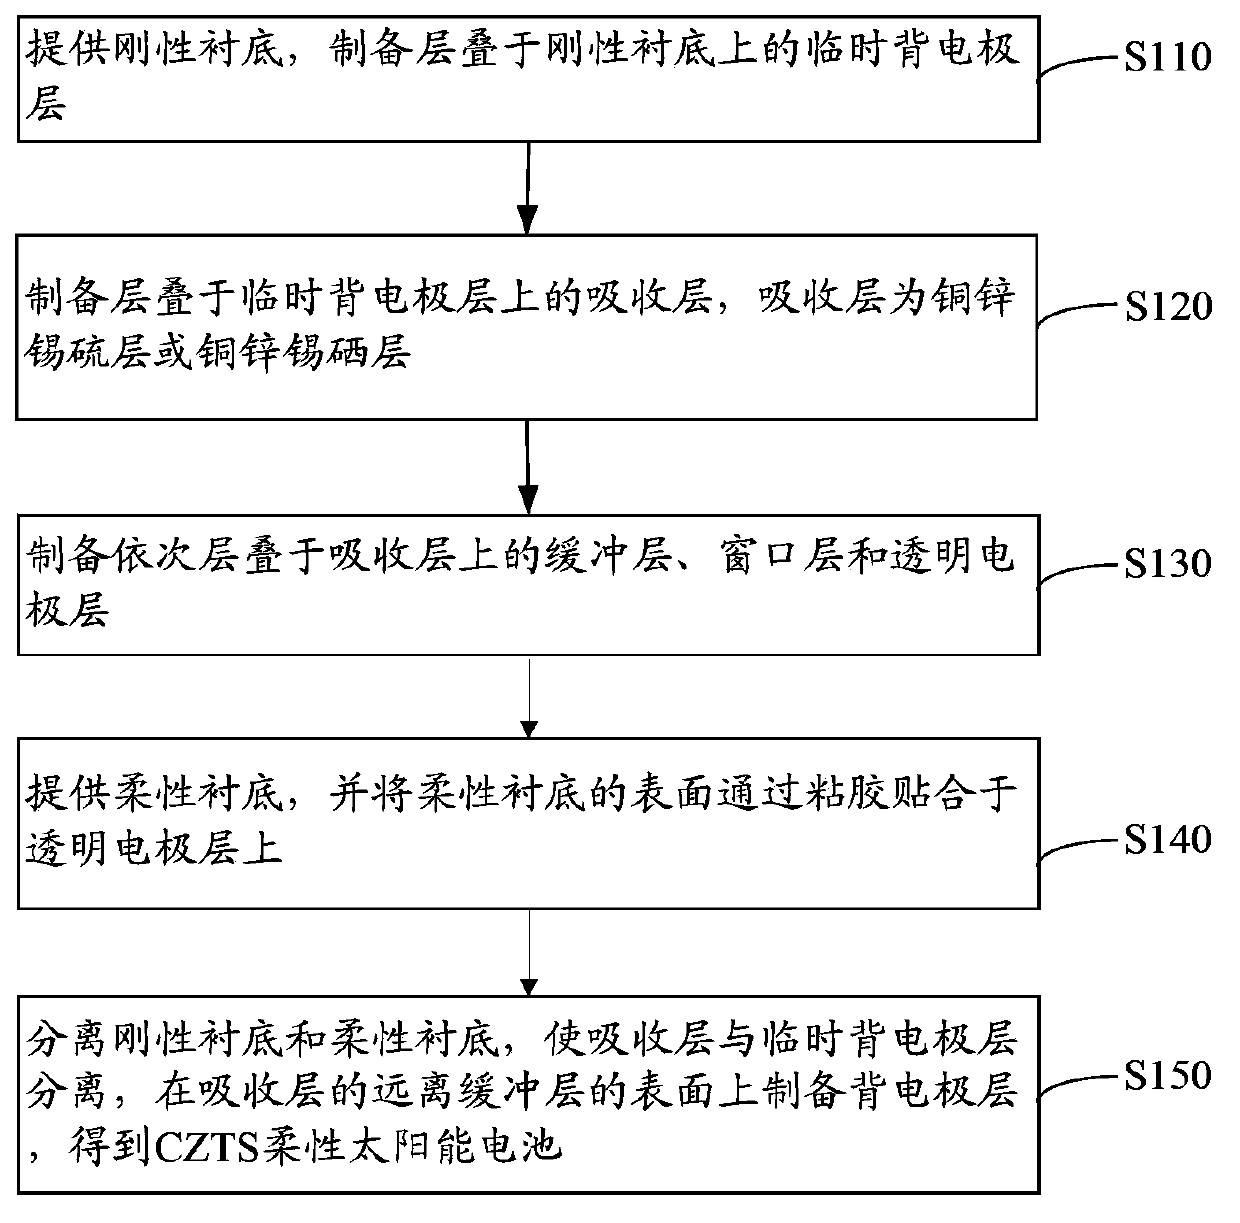 Copper zinc tin sulfide (CZTS) flexible solar cell and preparation method thereof